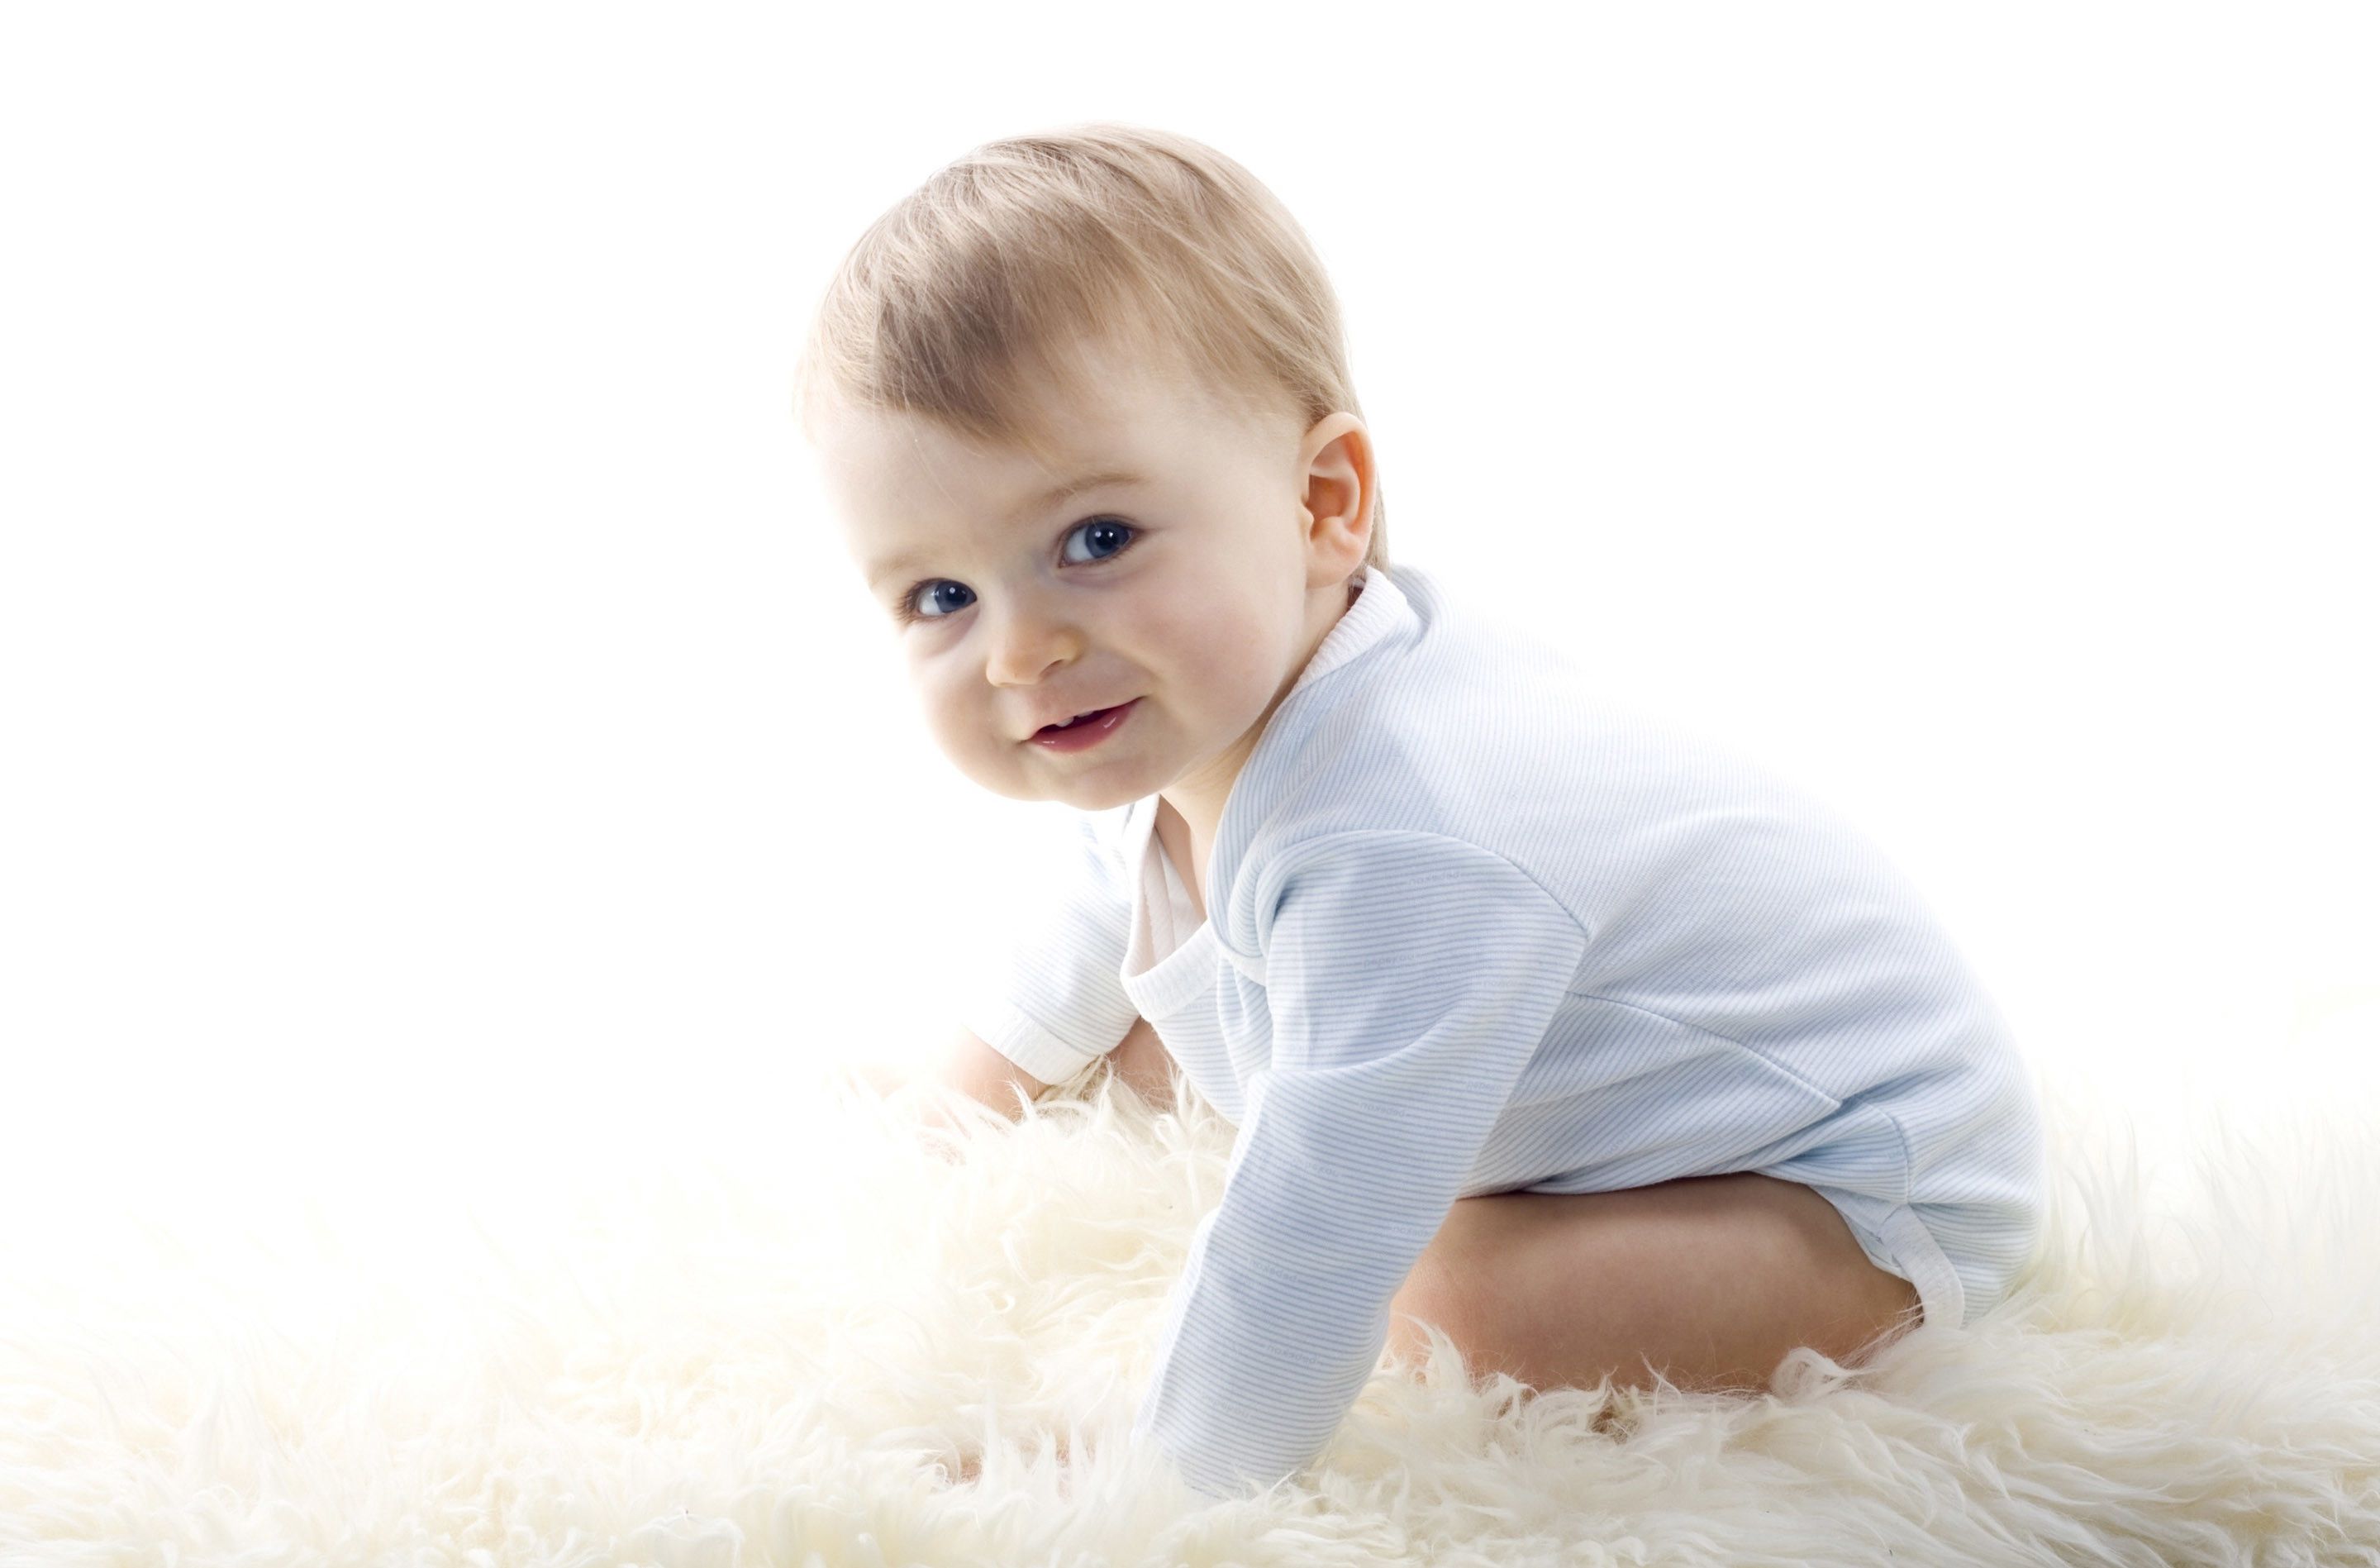 Lovely And Cute Baby Boy Image Free Download Baby Good Night Cute Baby HD Wallpaper